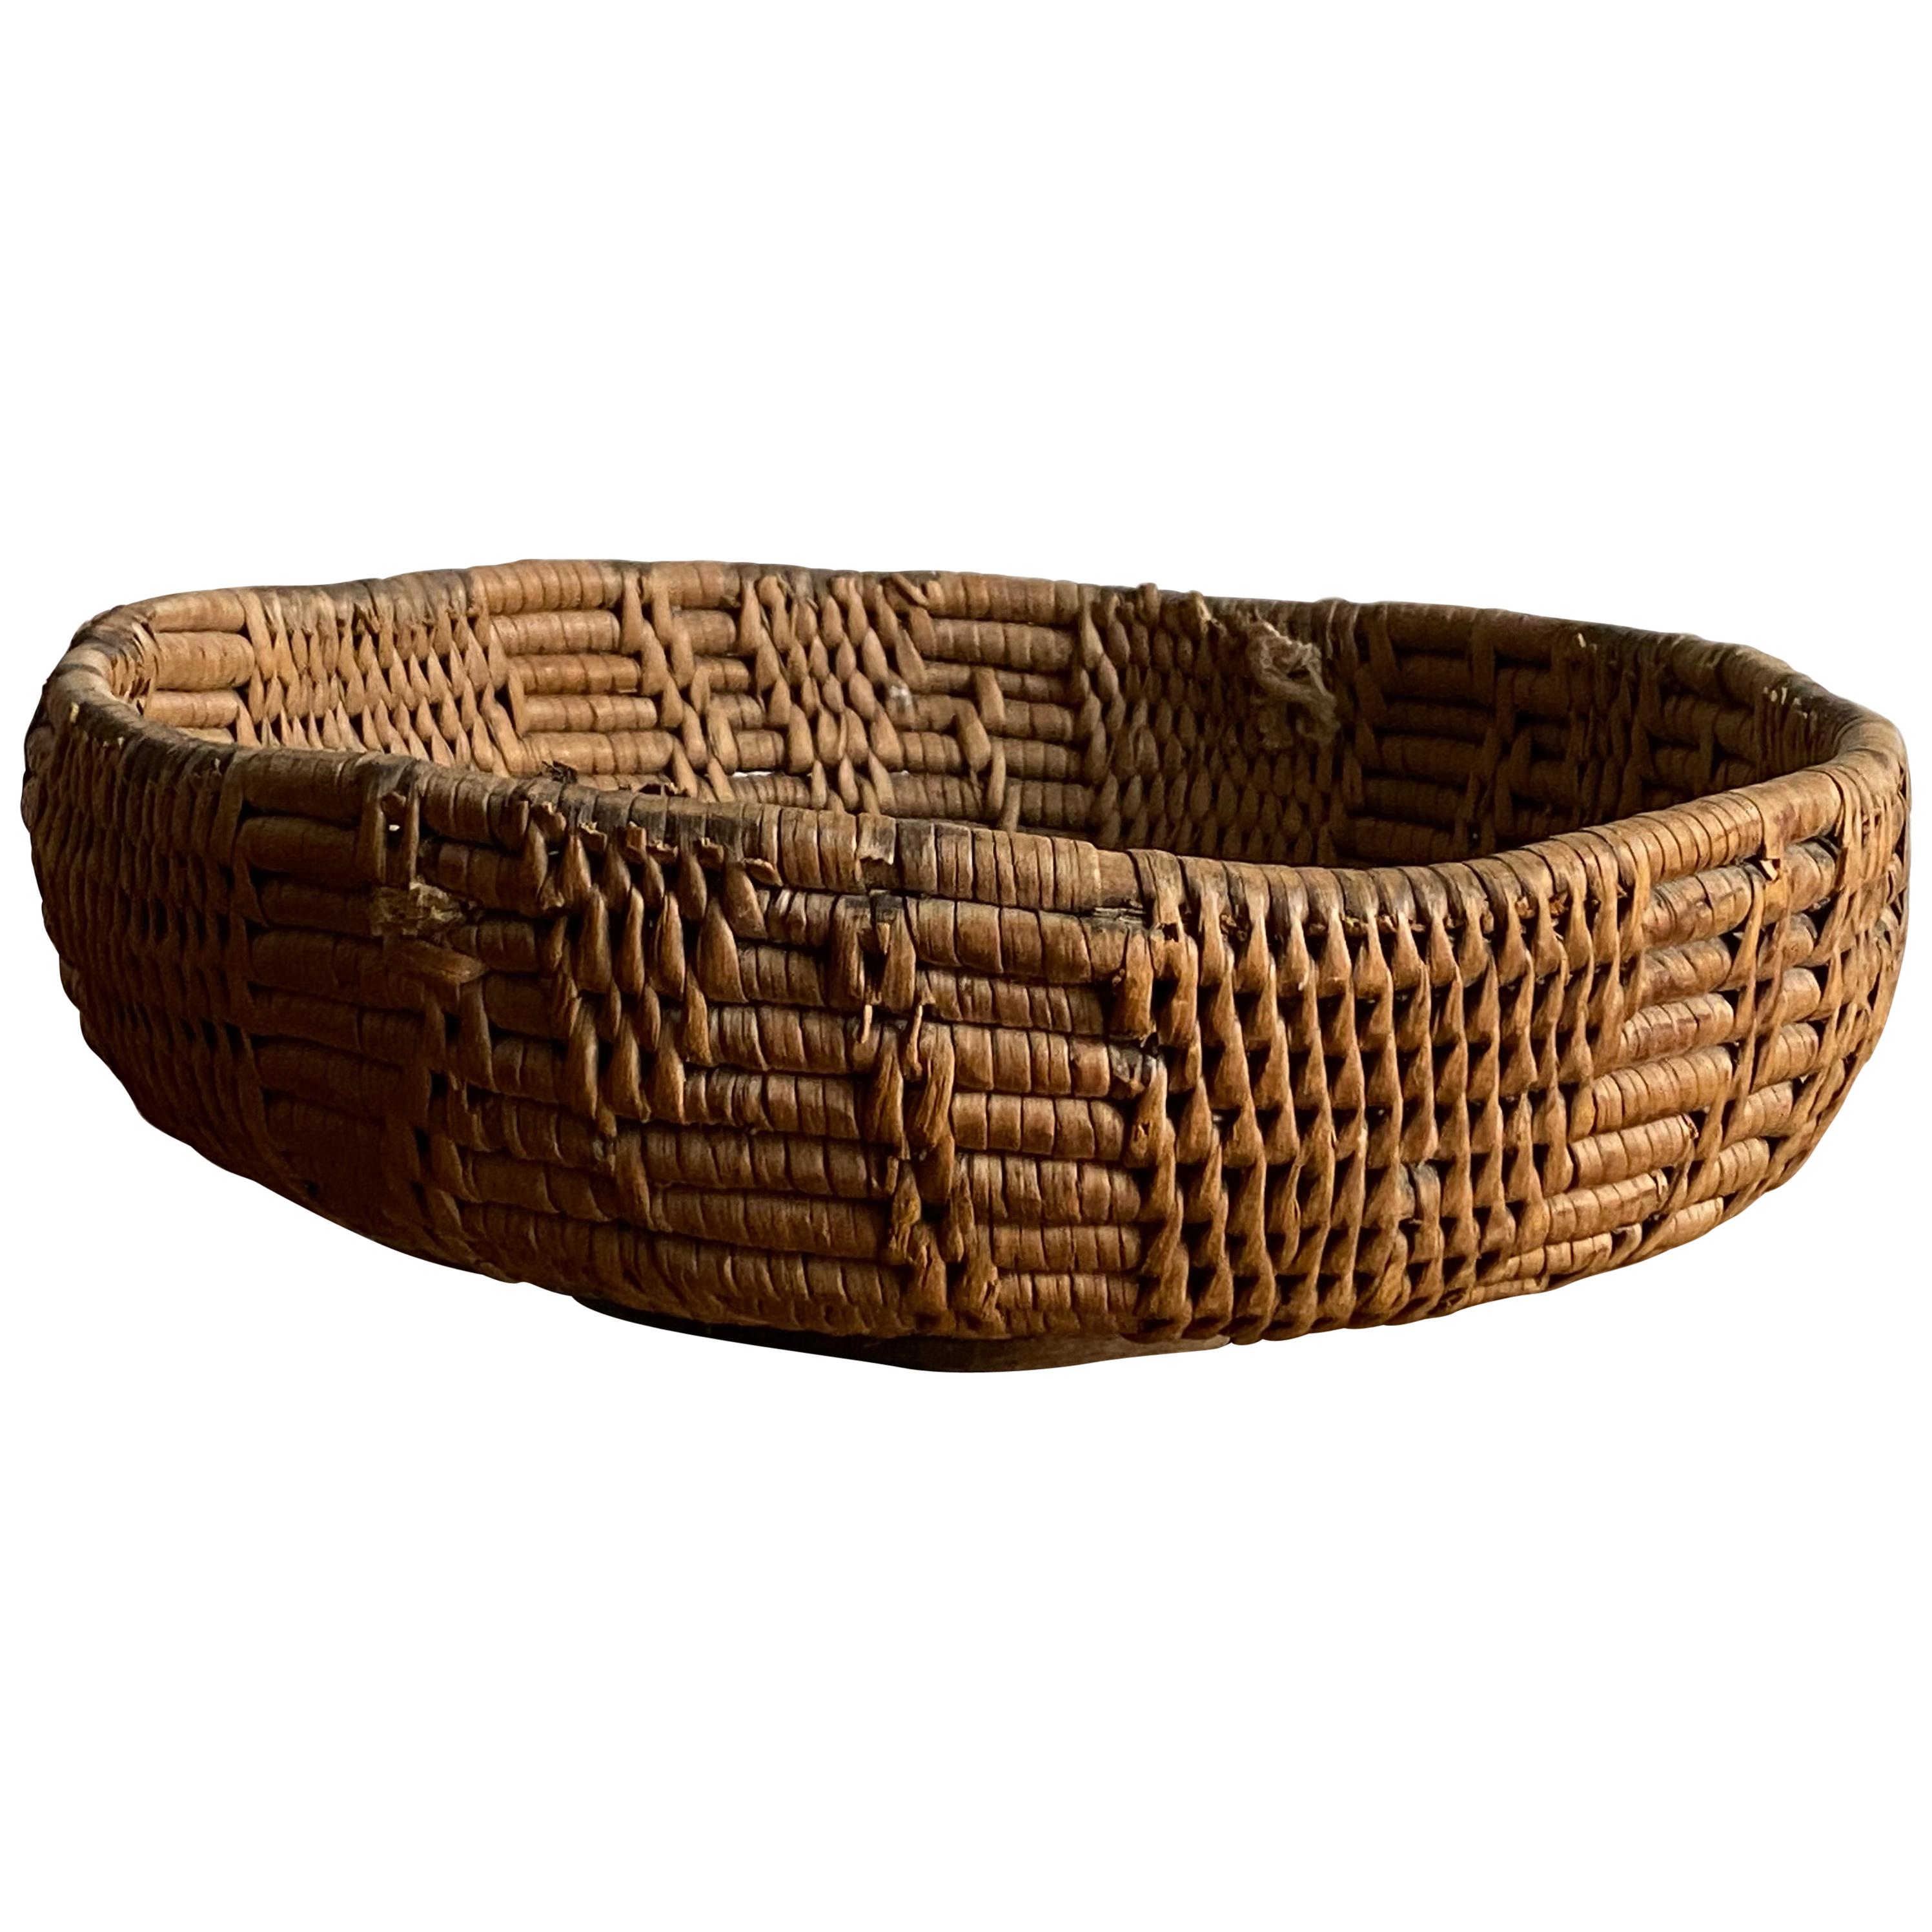 Swedish Craft, Basket or Bowl, Woven Fir Root, Sweden, 19th Century